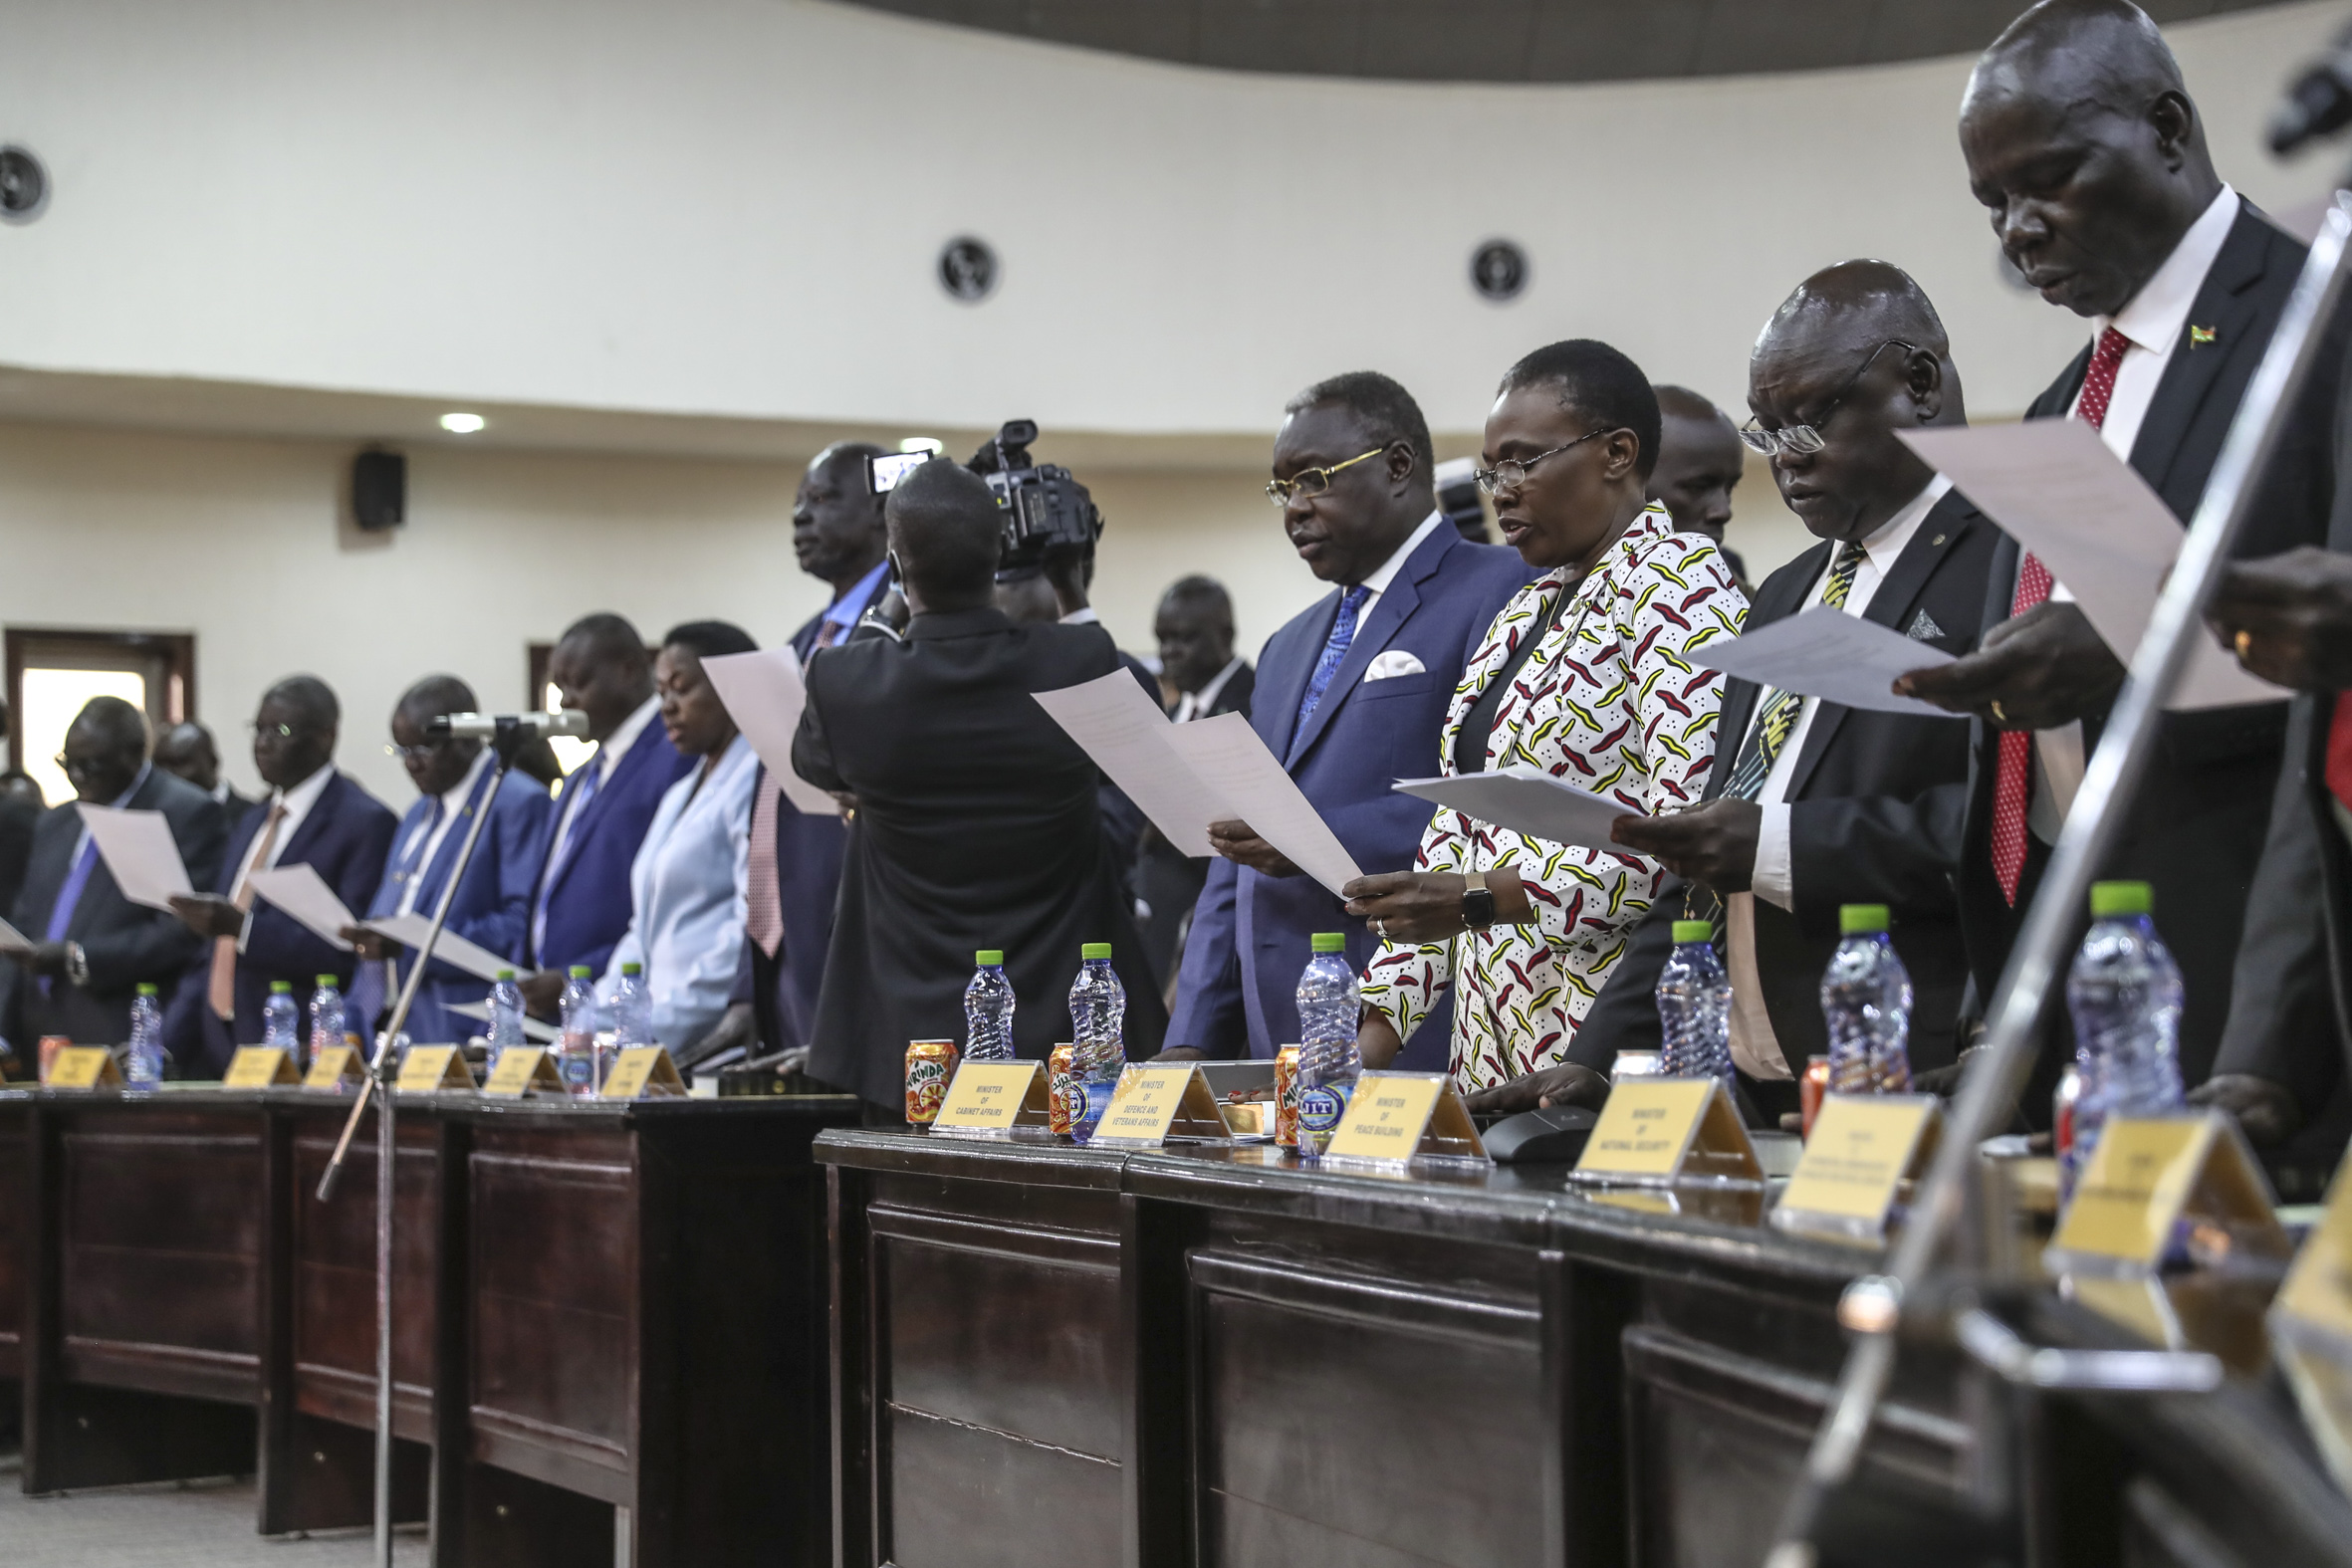 Swearing-in of ministers in Sudan's transitional government March 2020 (photo credit: UNMISS/flickr)